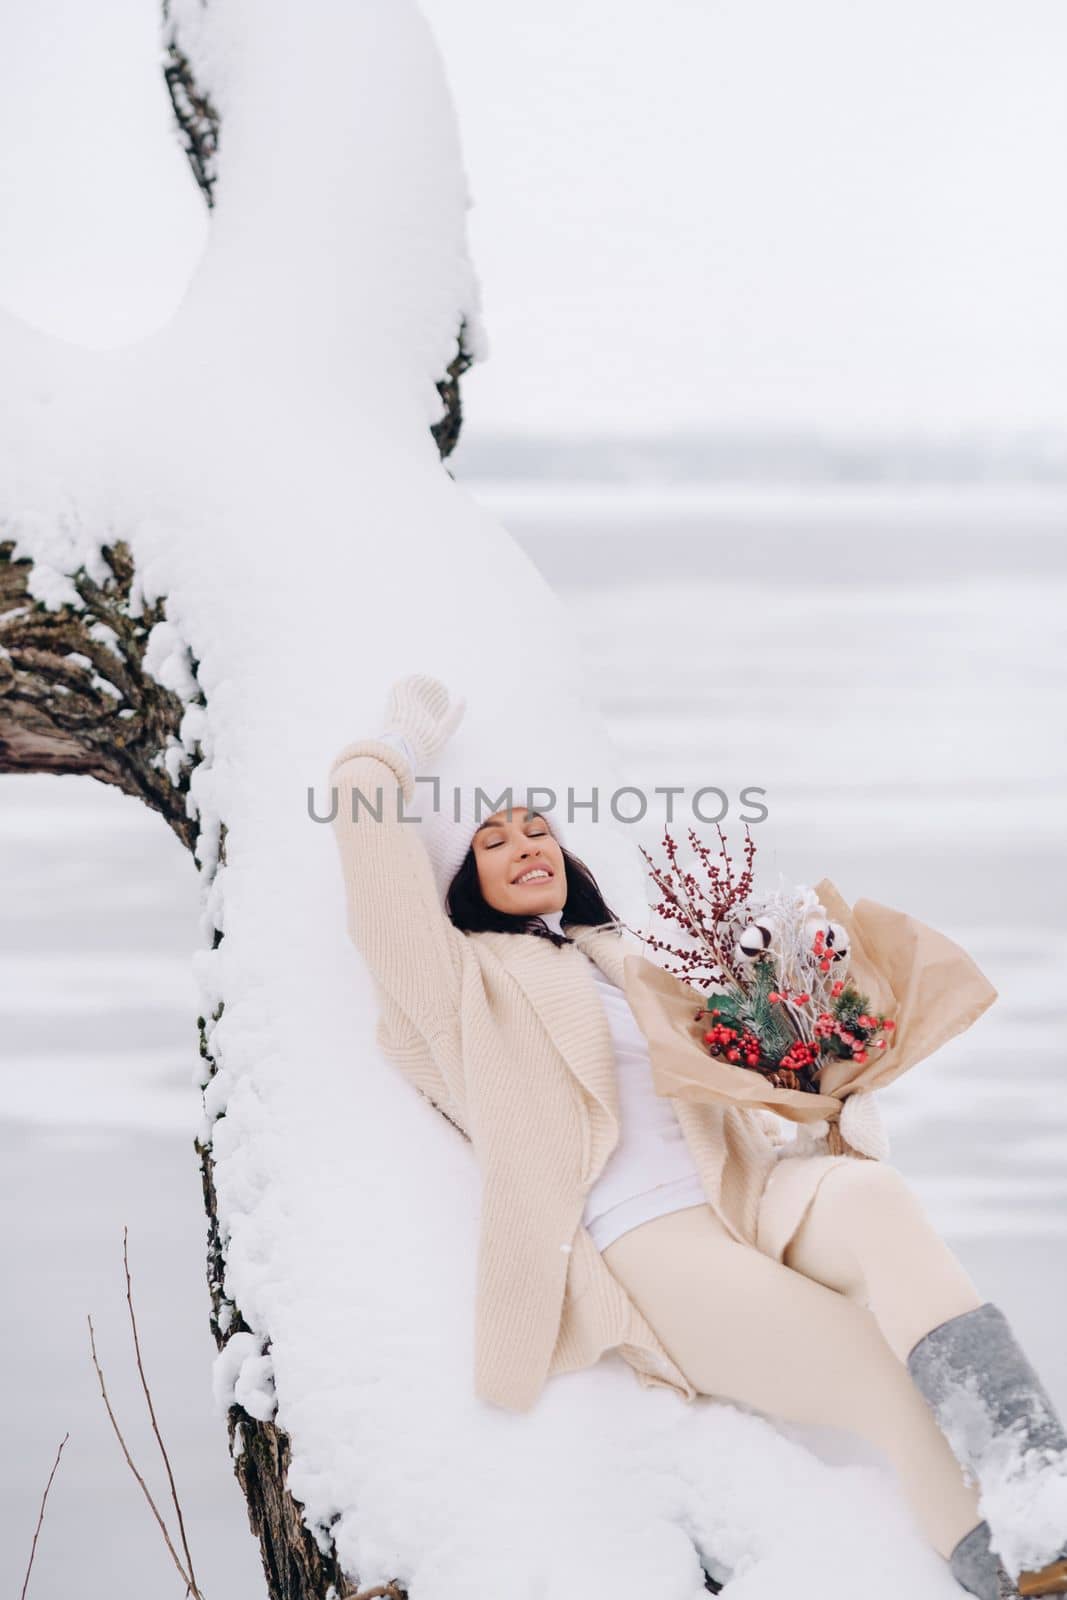 A beautiful girl in a beige cardigan and a white hat with flowers enjoys a snowy winter in nature.